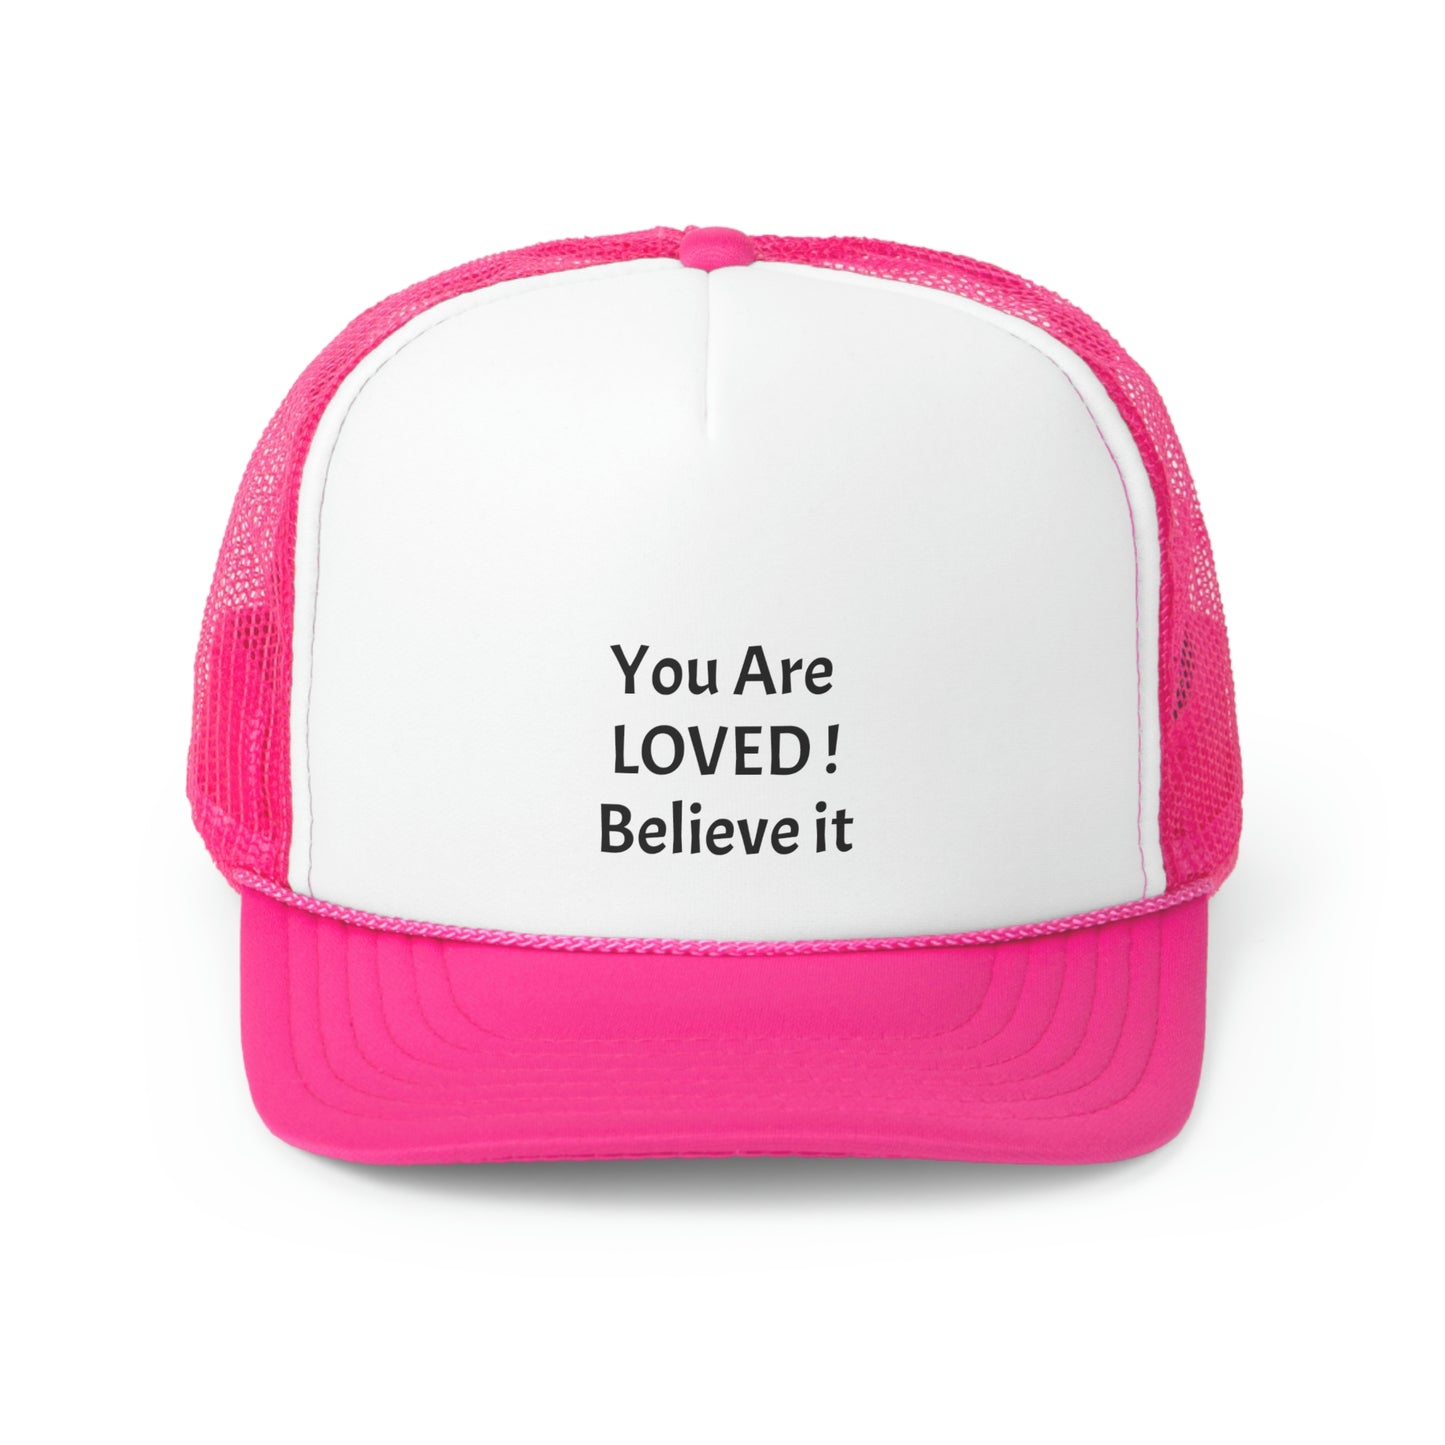 You Are Loved! Trucker Caps